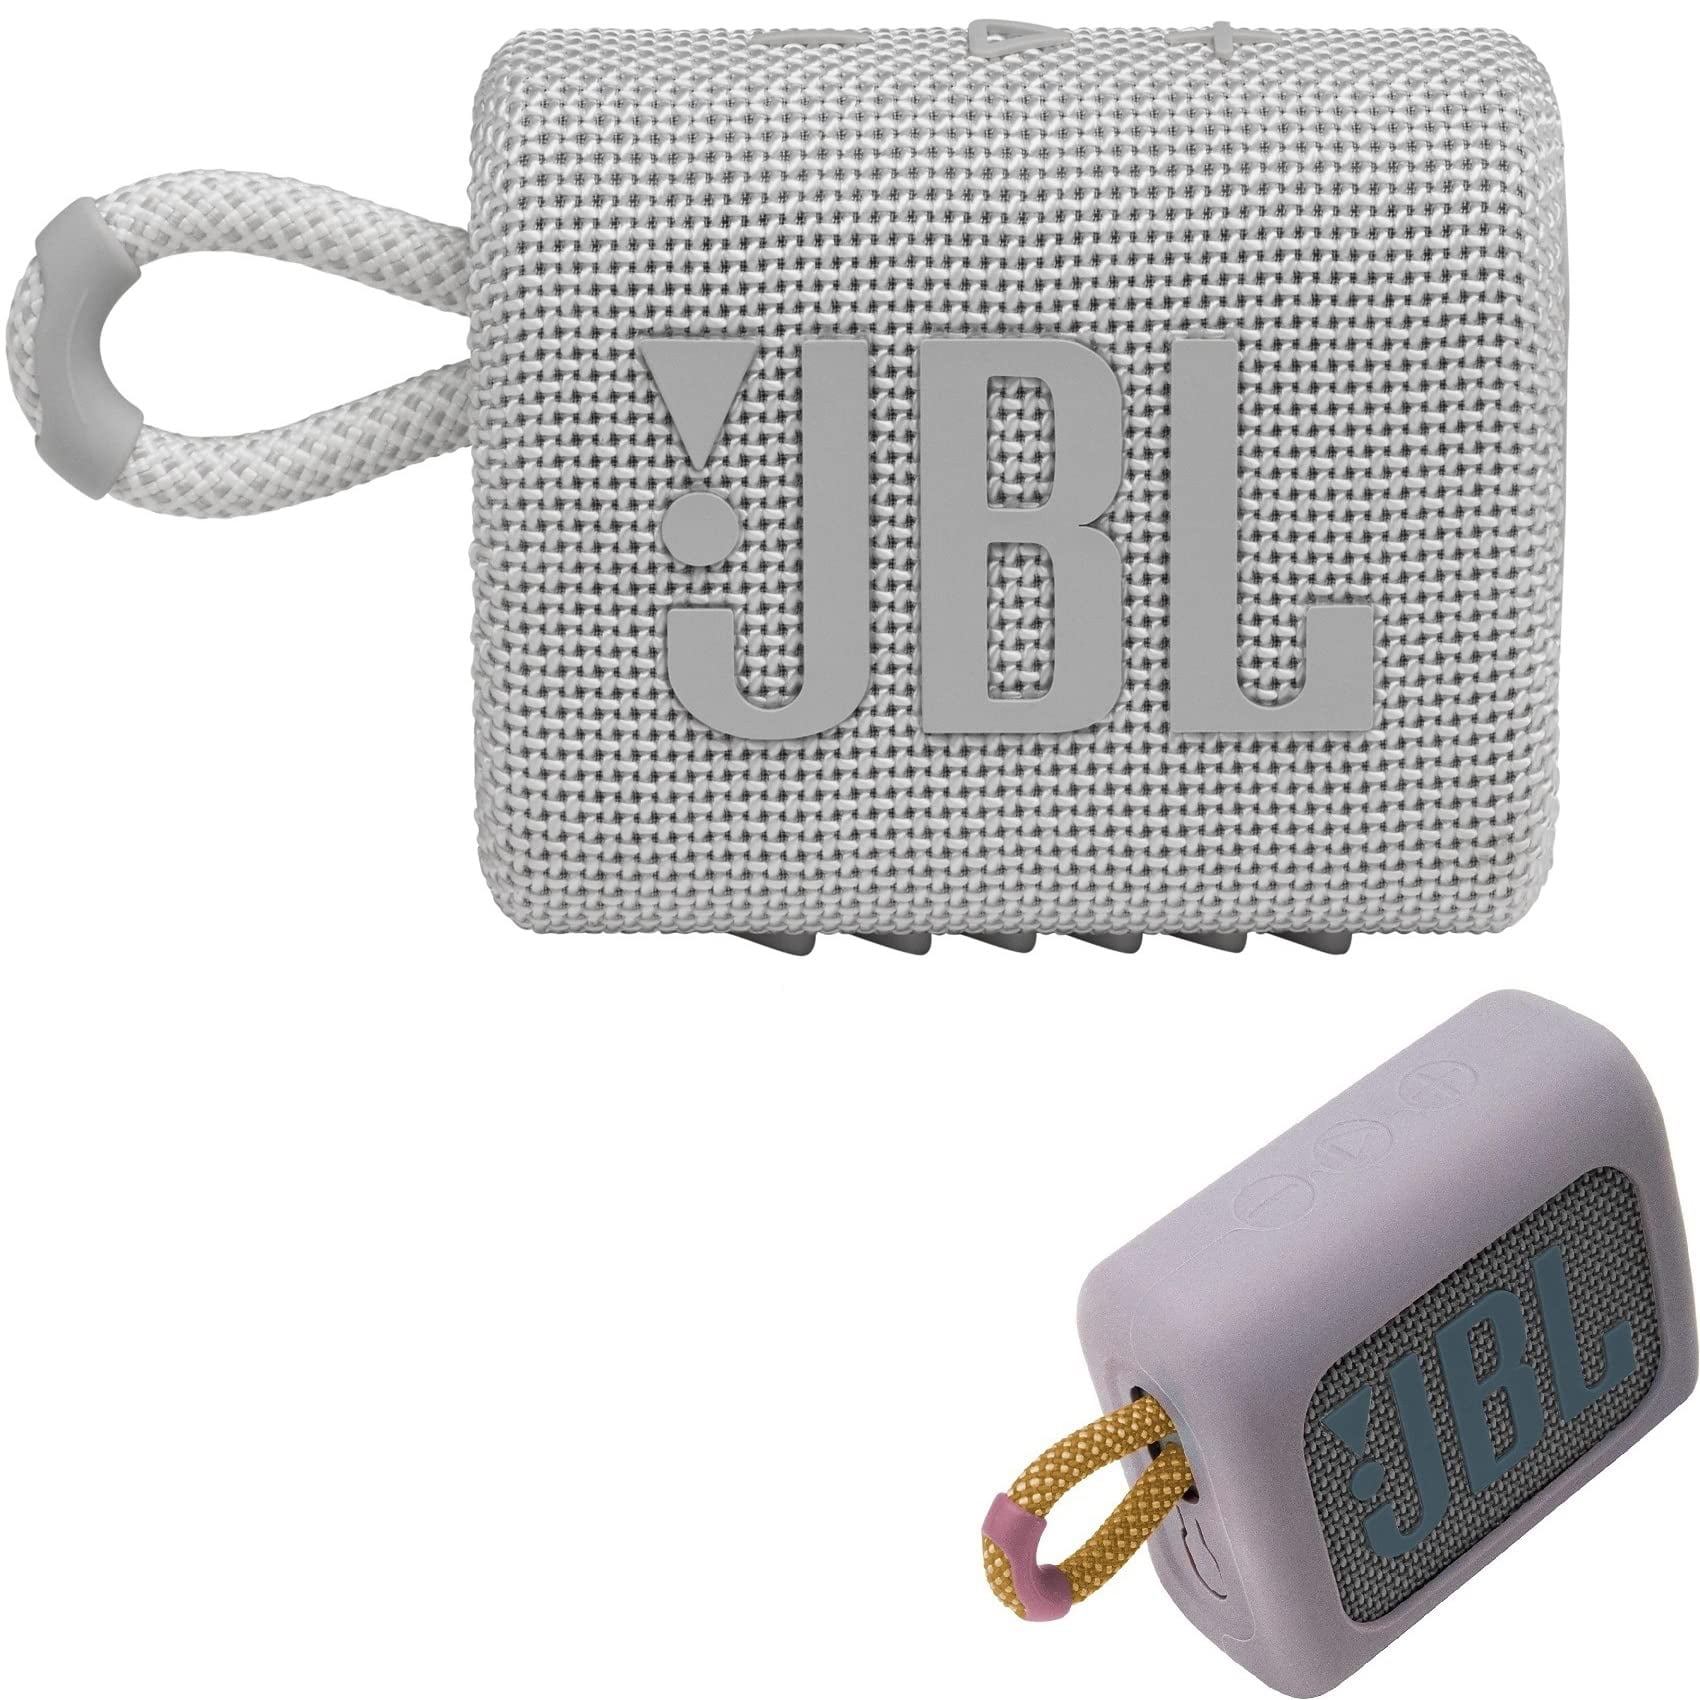 JBL GO3 Waterproof Wireless Bluetooth Speaker Bundle with Protective Silicone Carrying Sleeve (White - Gray Sleeve)